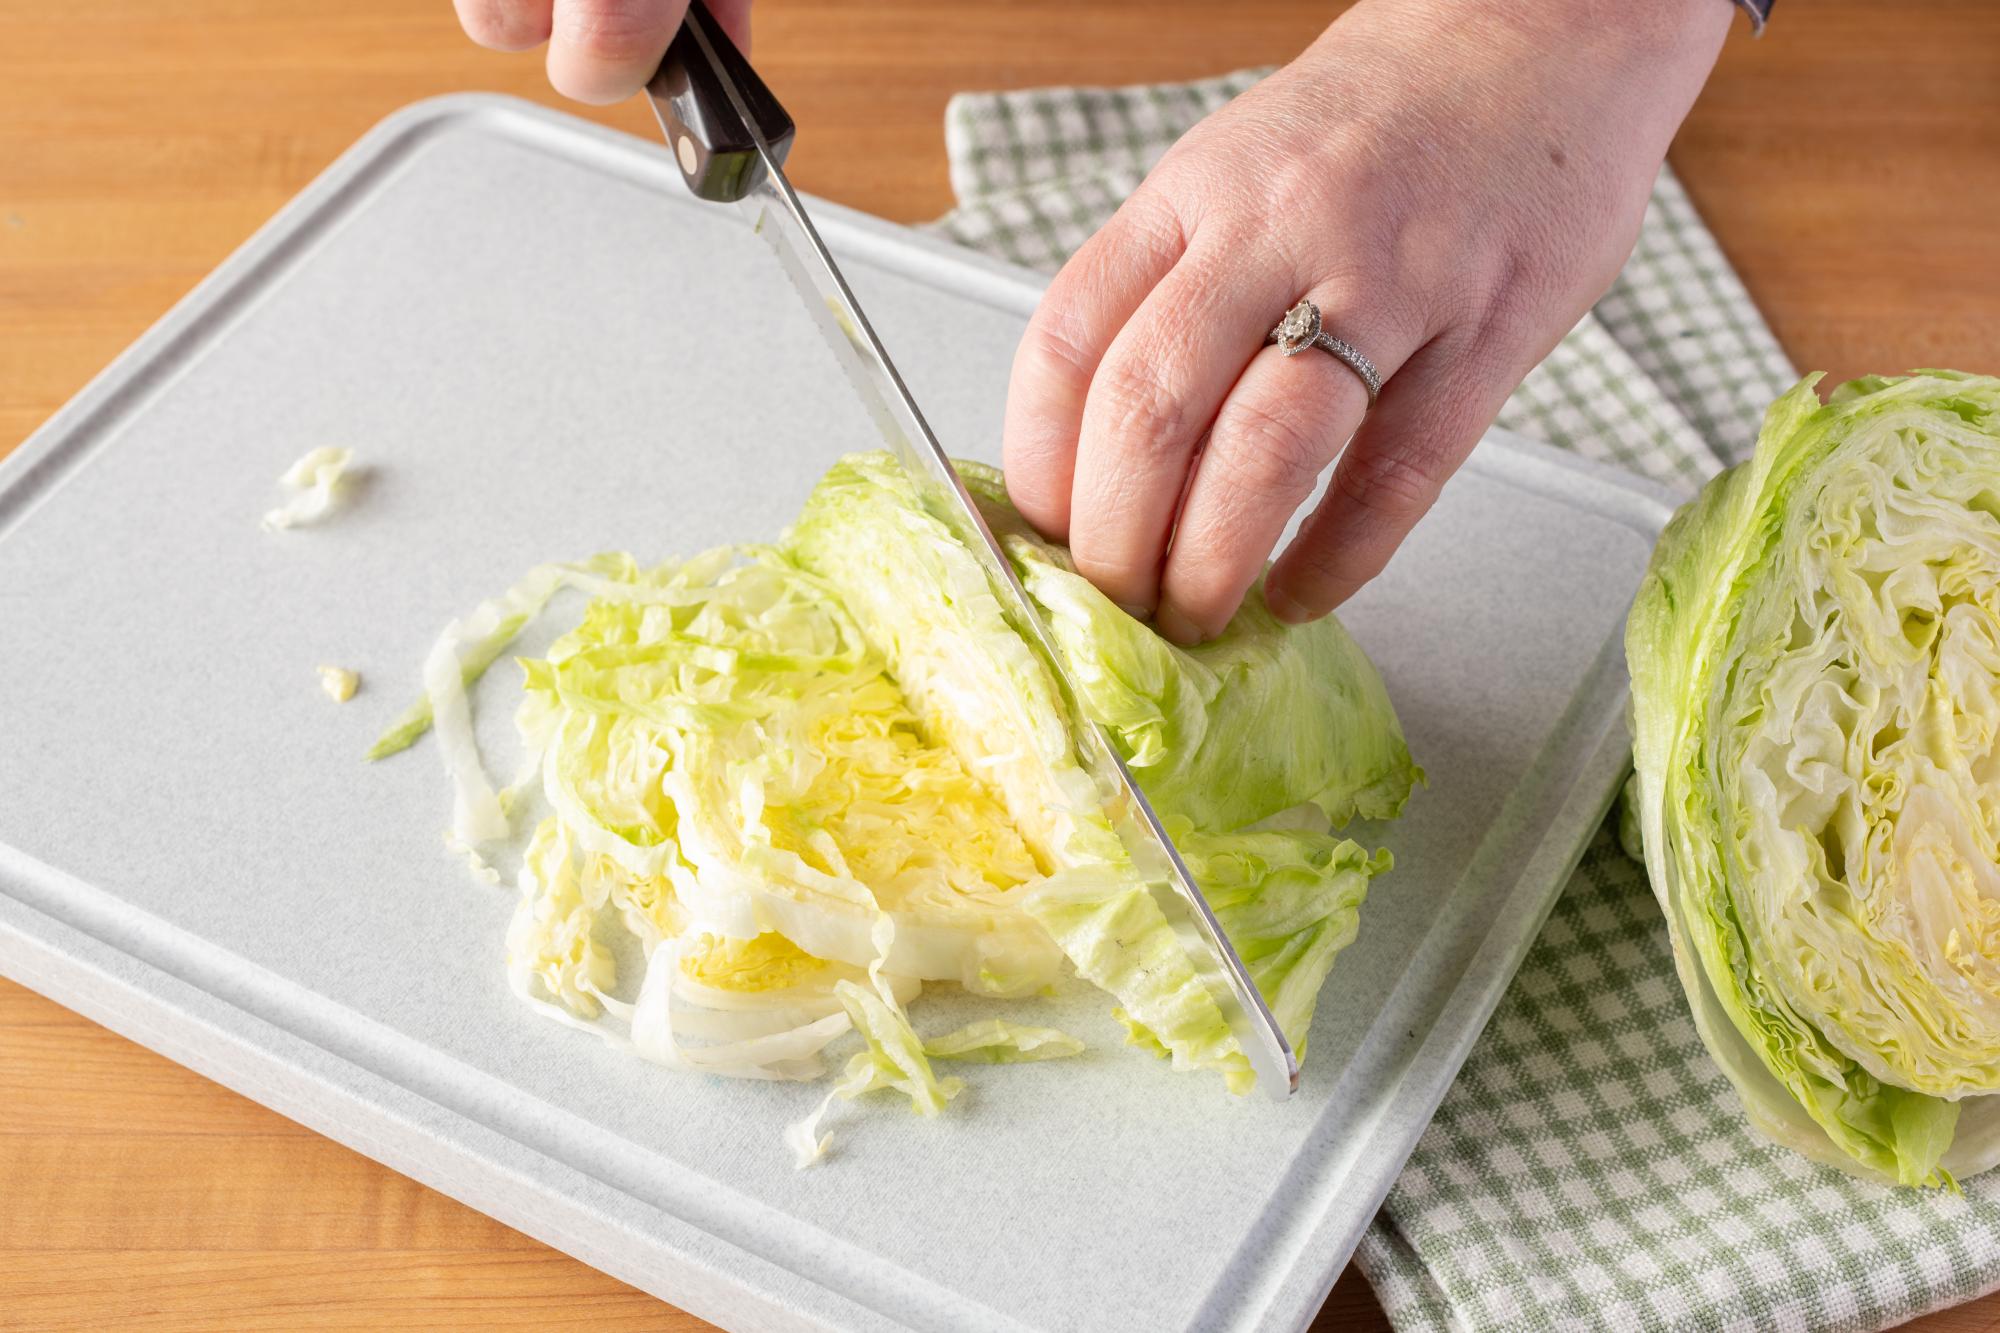 Using a Petite Slicer to shred the lettuce.